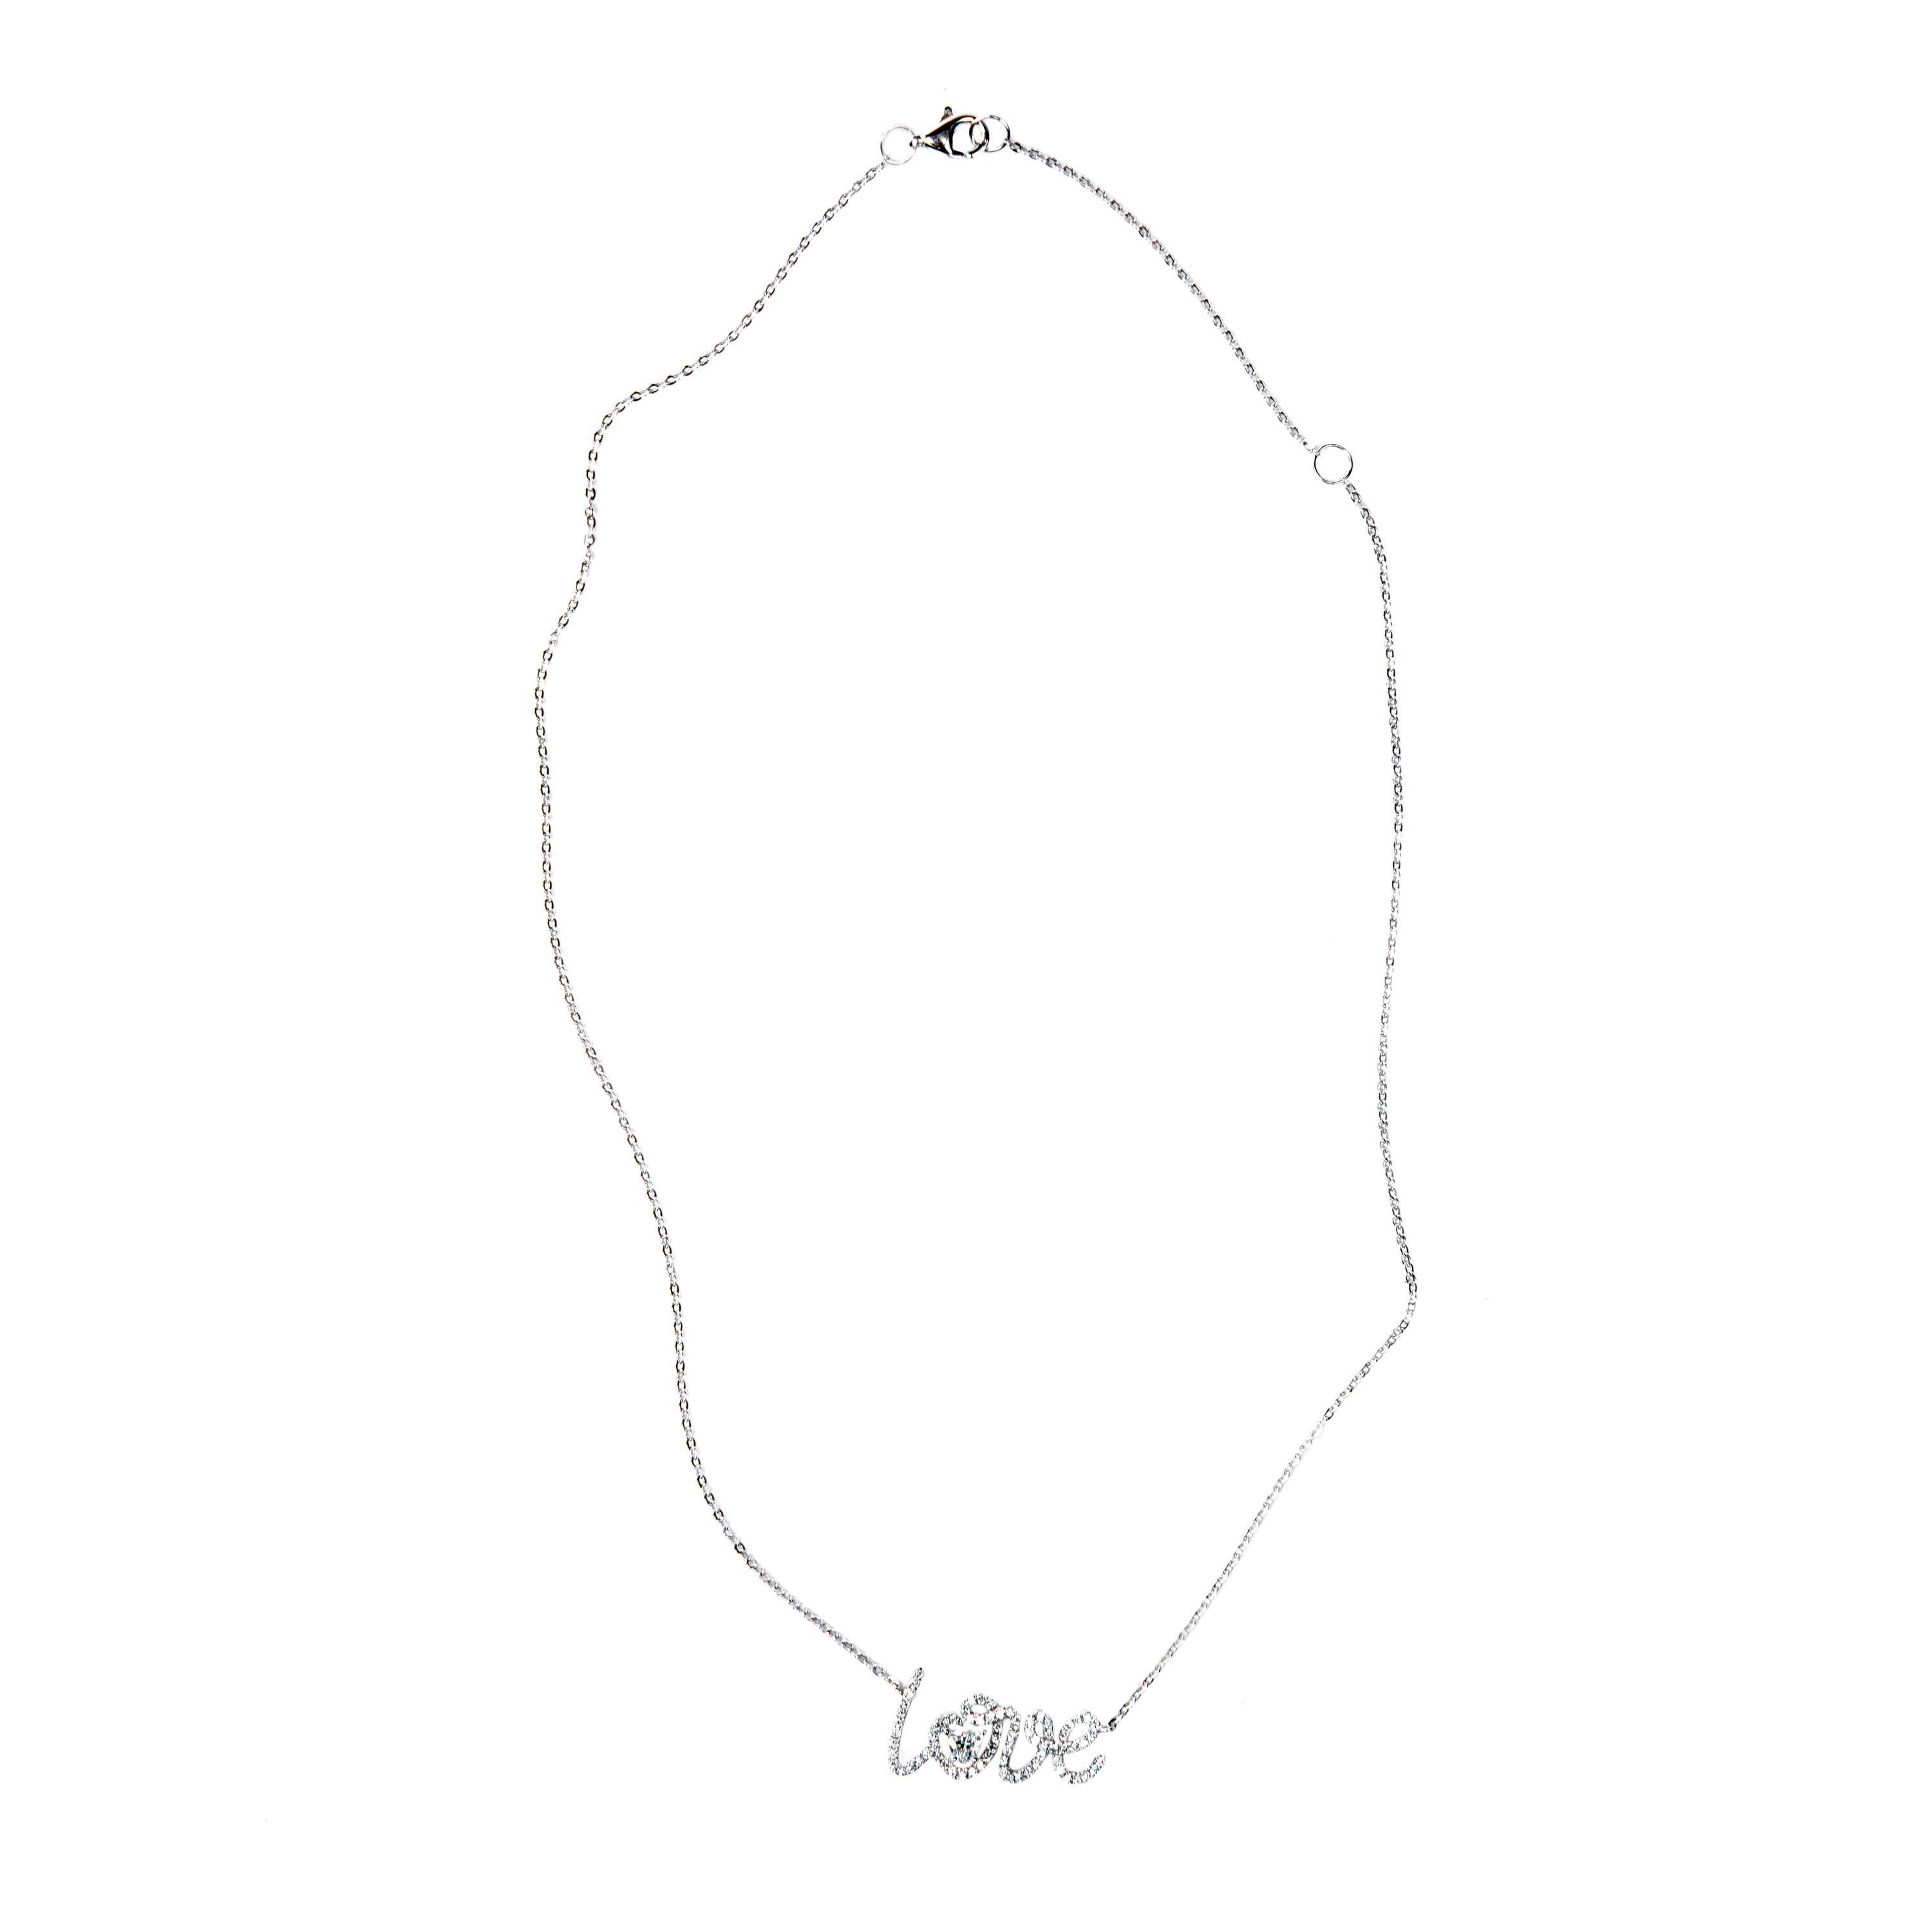 Jona design collection, hand crafted in Italy, 18 karat white gold necklace, 15.35 inch long suspending a LOVE pendant,  centering a heart shape diamond and set with round white diamonds, F Color, VVS1 Clarity, for a total weight of 0.42 carats.